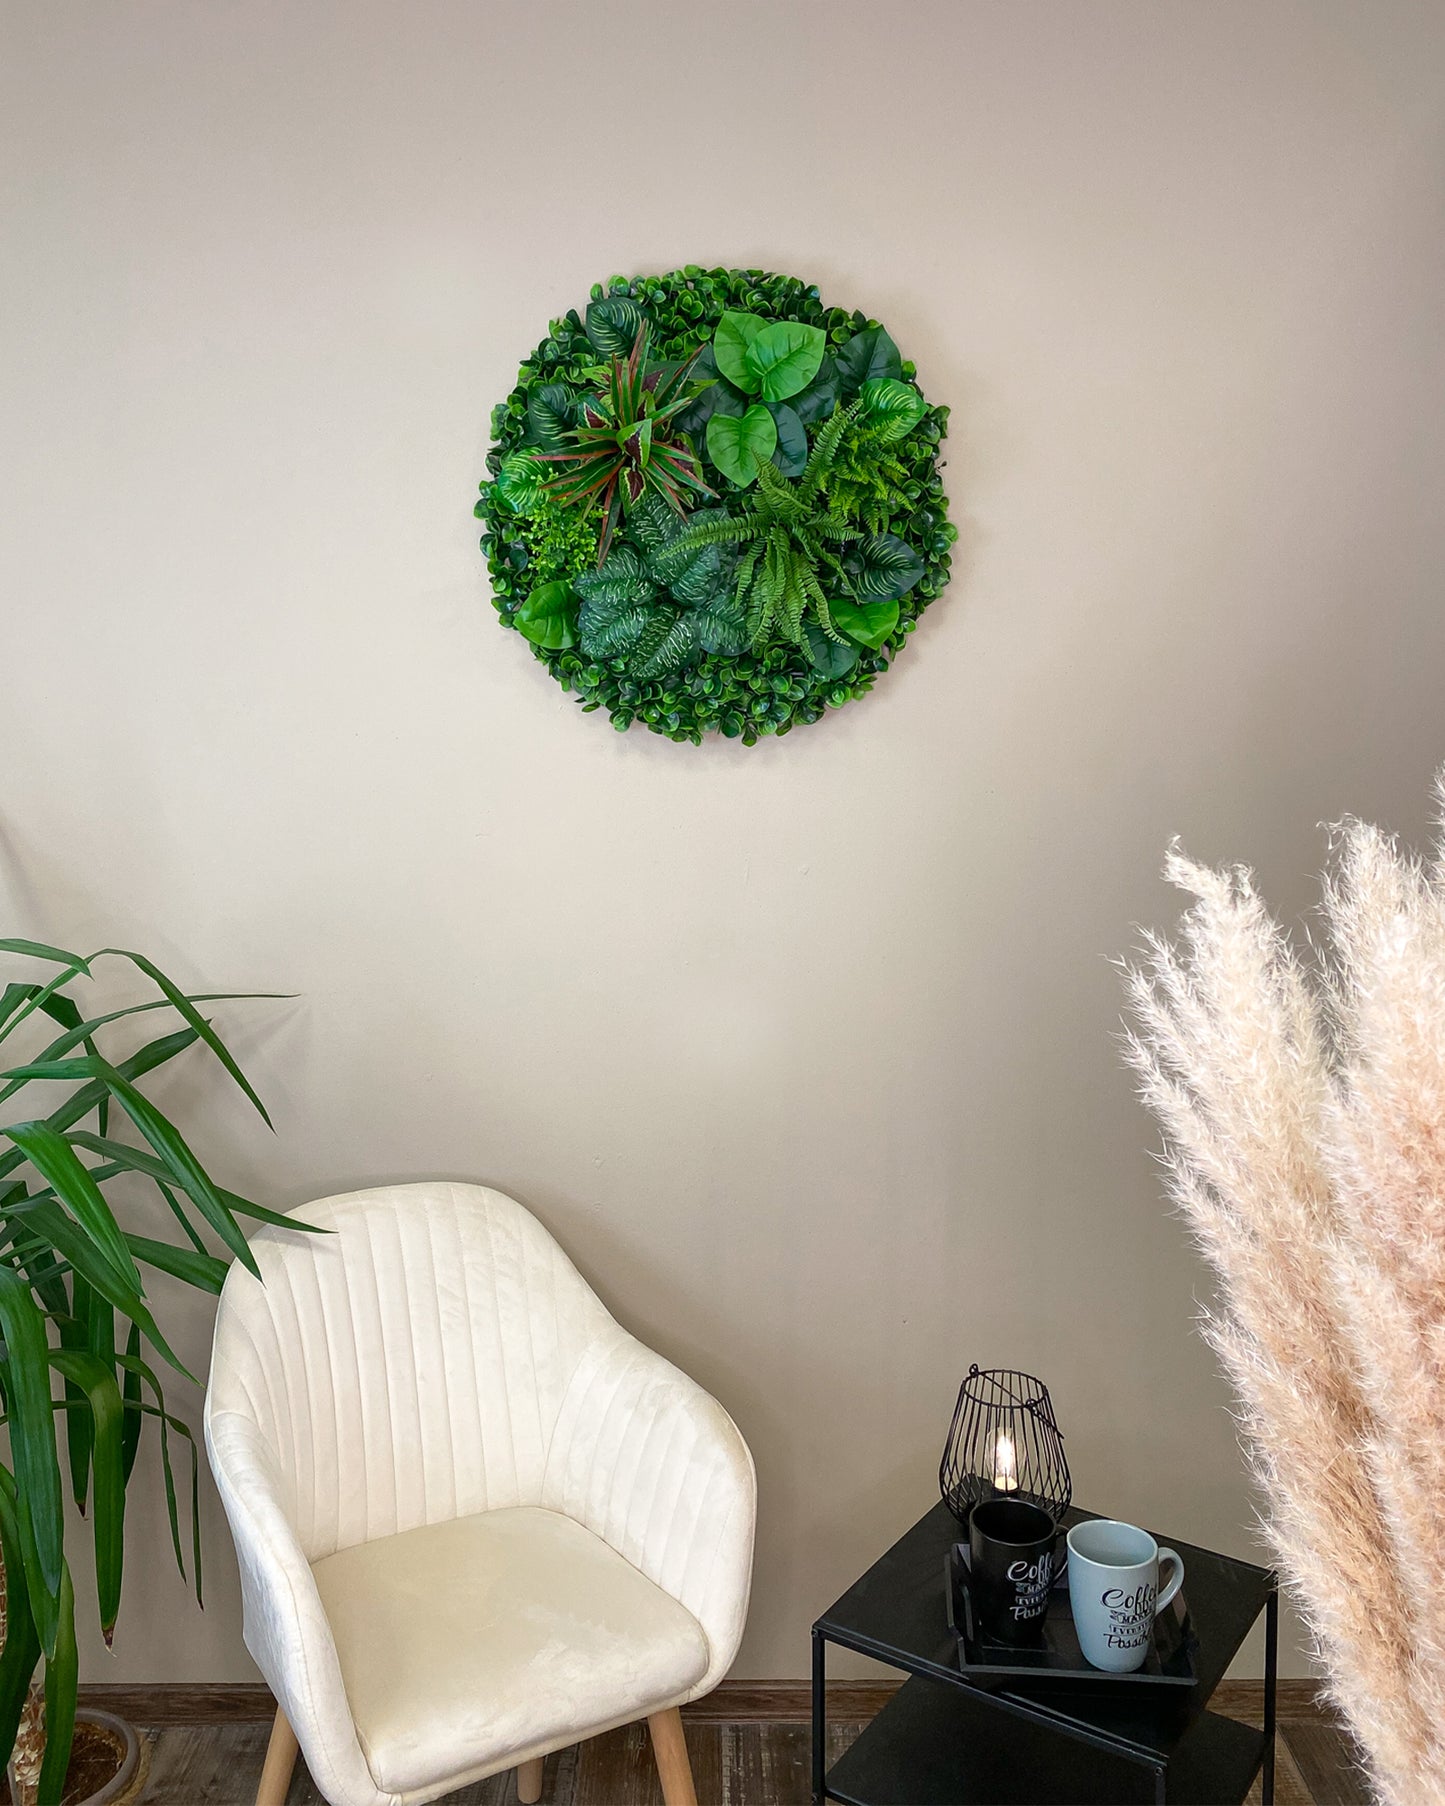 Plant Sphere/plant wall "RHEA" made of Realtouch artificial plants